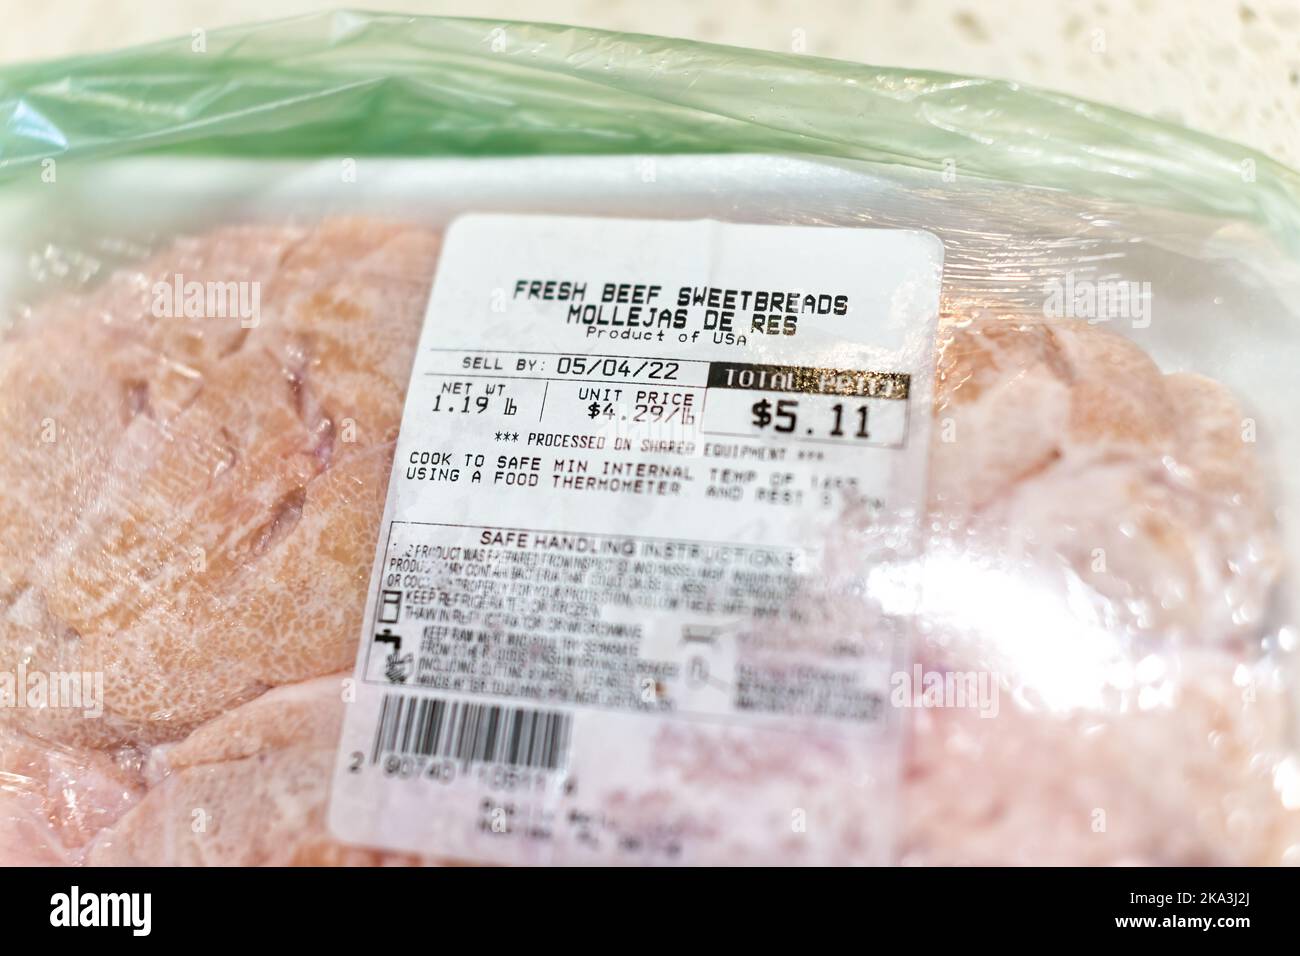 Naples, USA - May 1, 2022: Fresh beef sweetbreads thymus organ gland, nutritious meat food with price tag label sticker per pound in plastic wrap bag Stock Photo